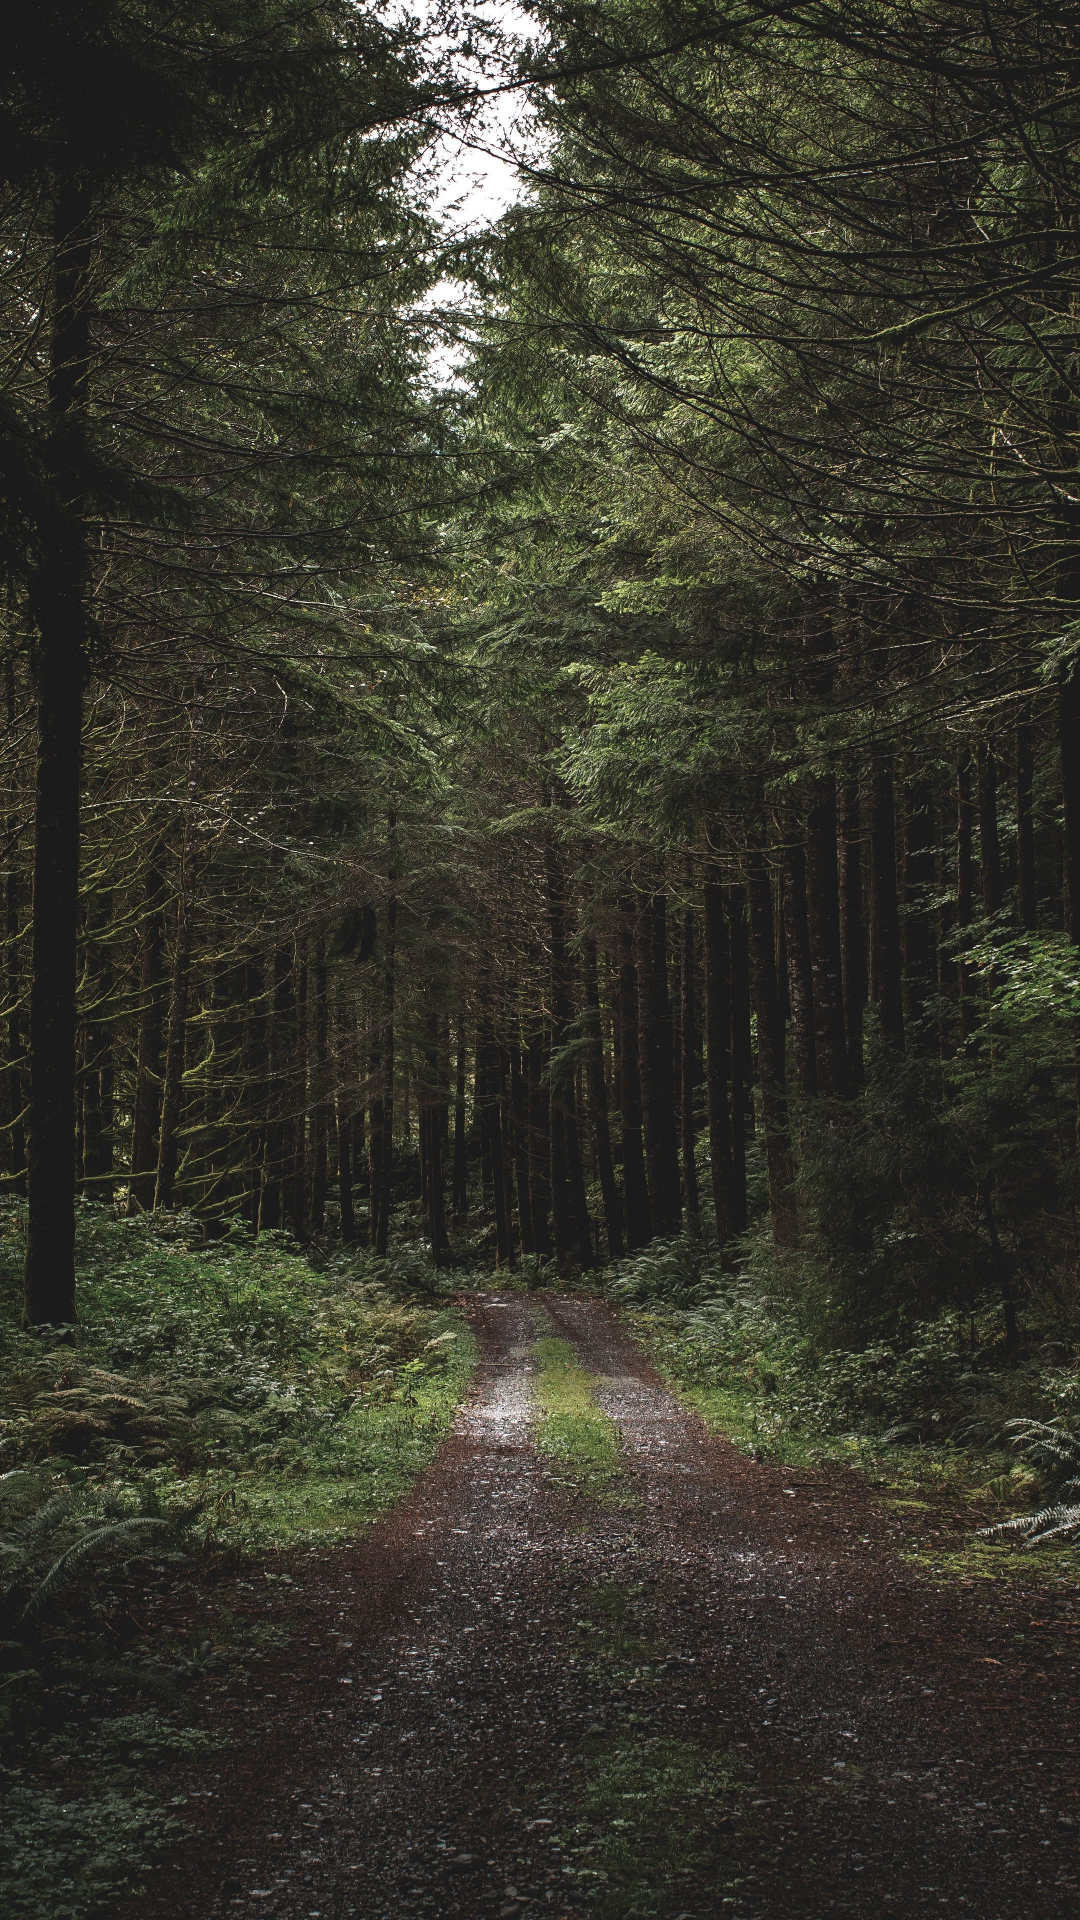 Dirt road, path, trees, forest, greenery, 1080x1920 wallpaper